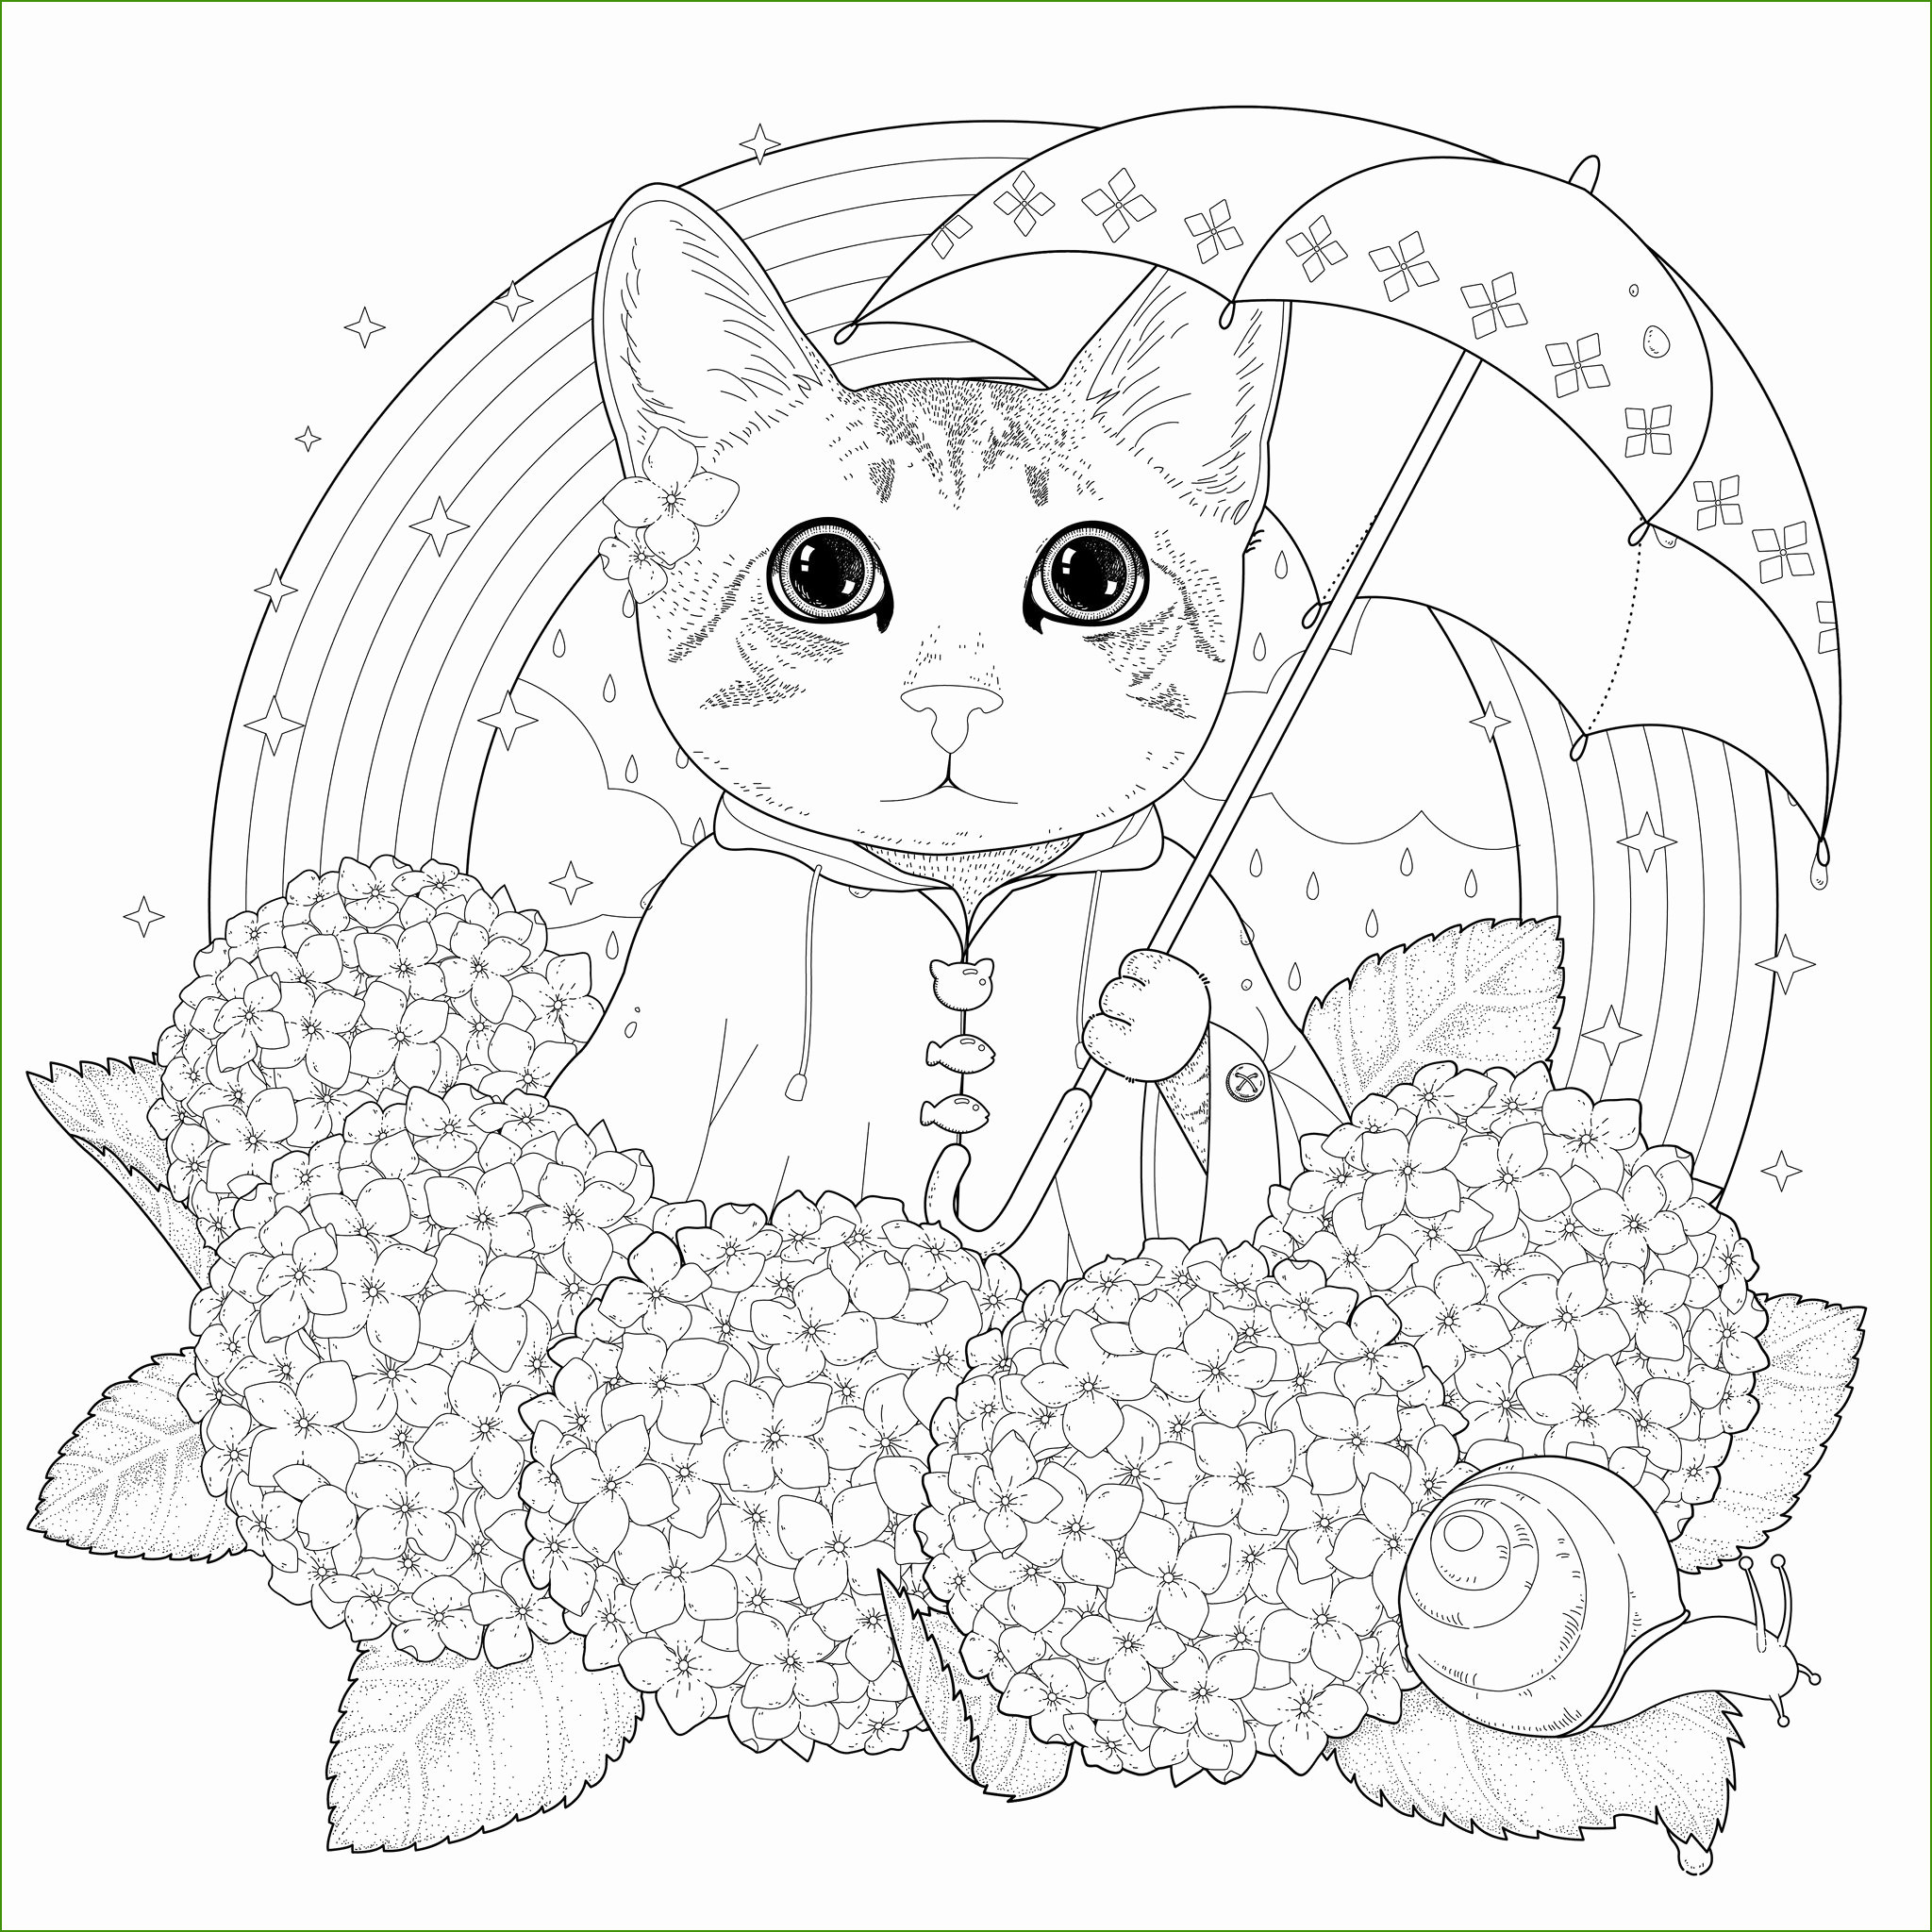 Coloriage Manga Chat Luxe Image Coloriage Manga Fille Chat Pas Fatiguant Coloriage De Chat